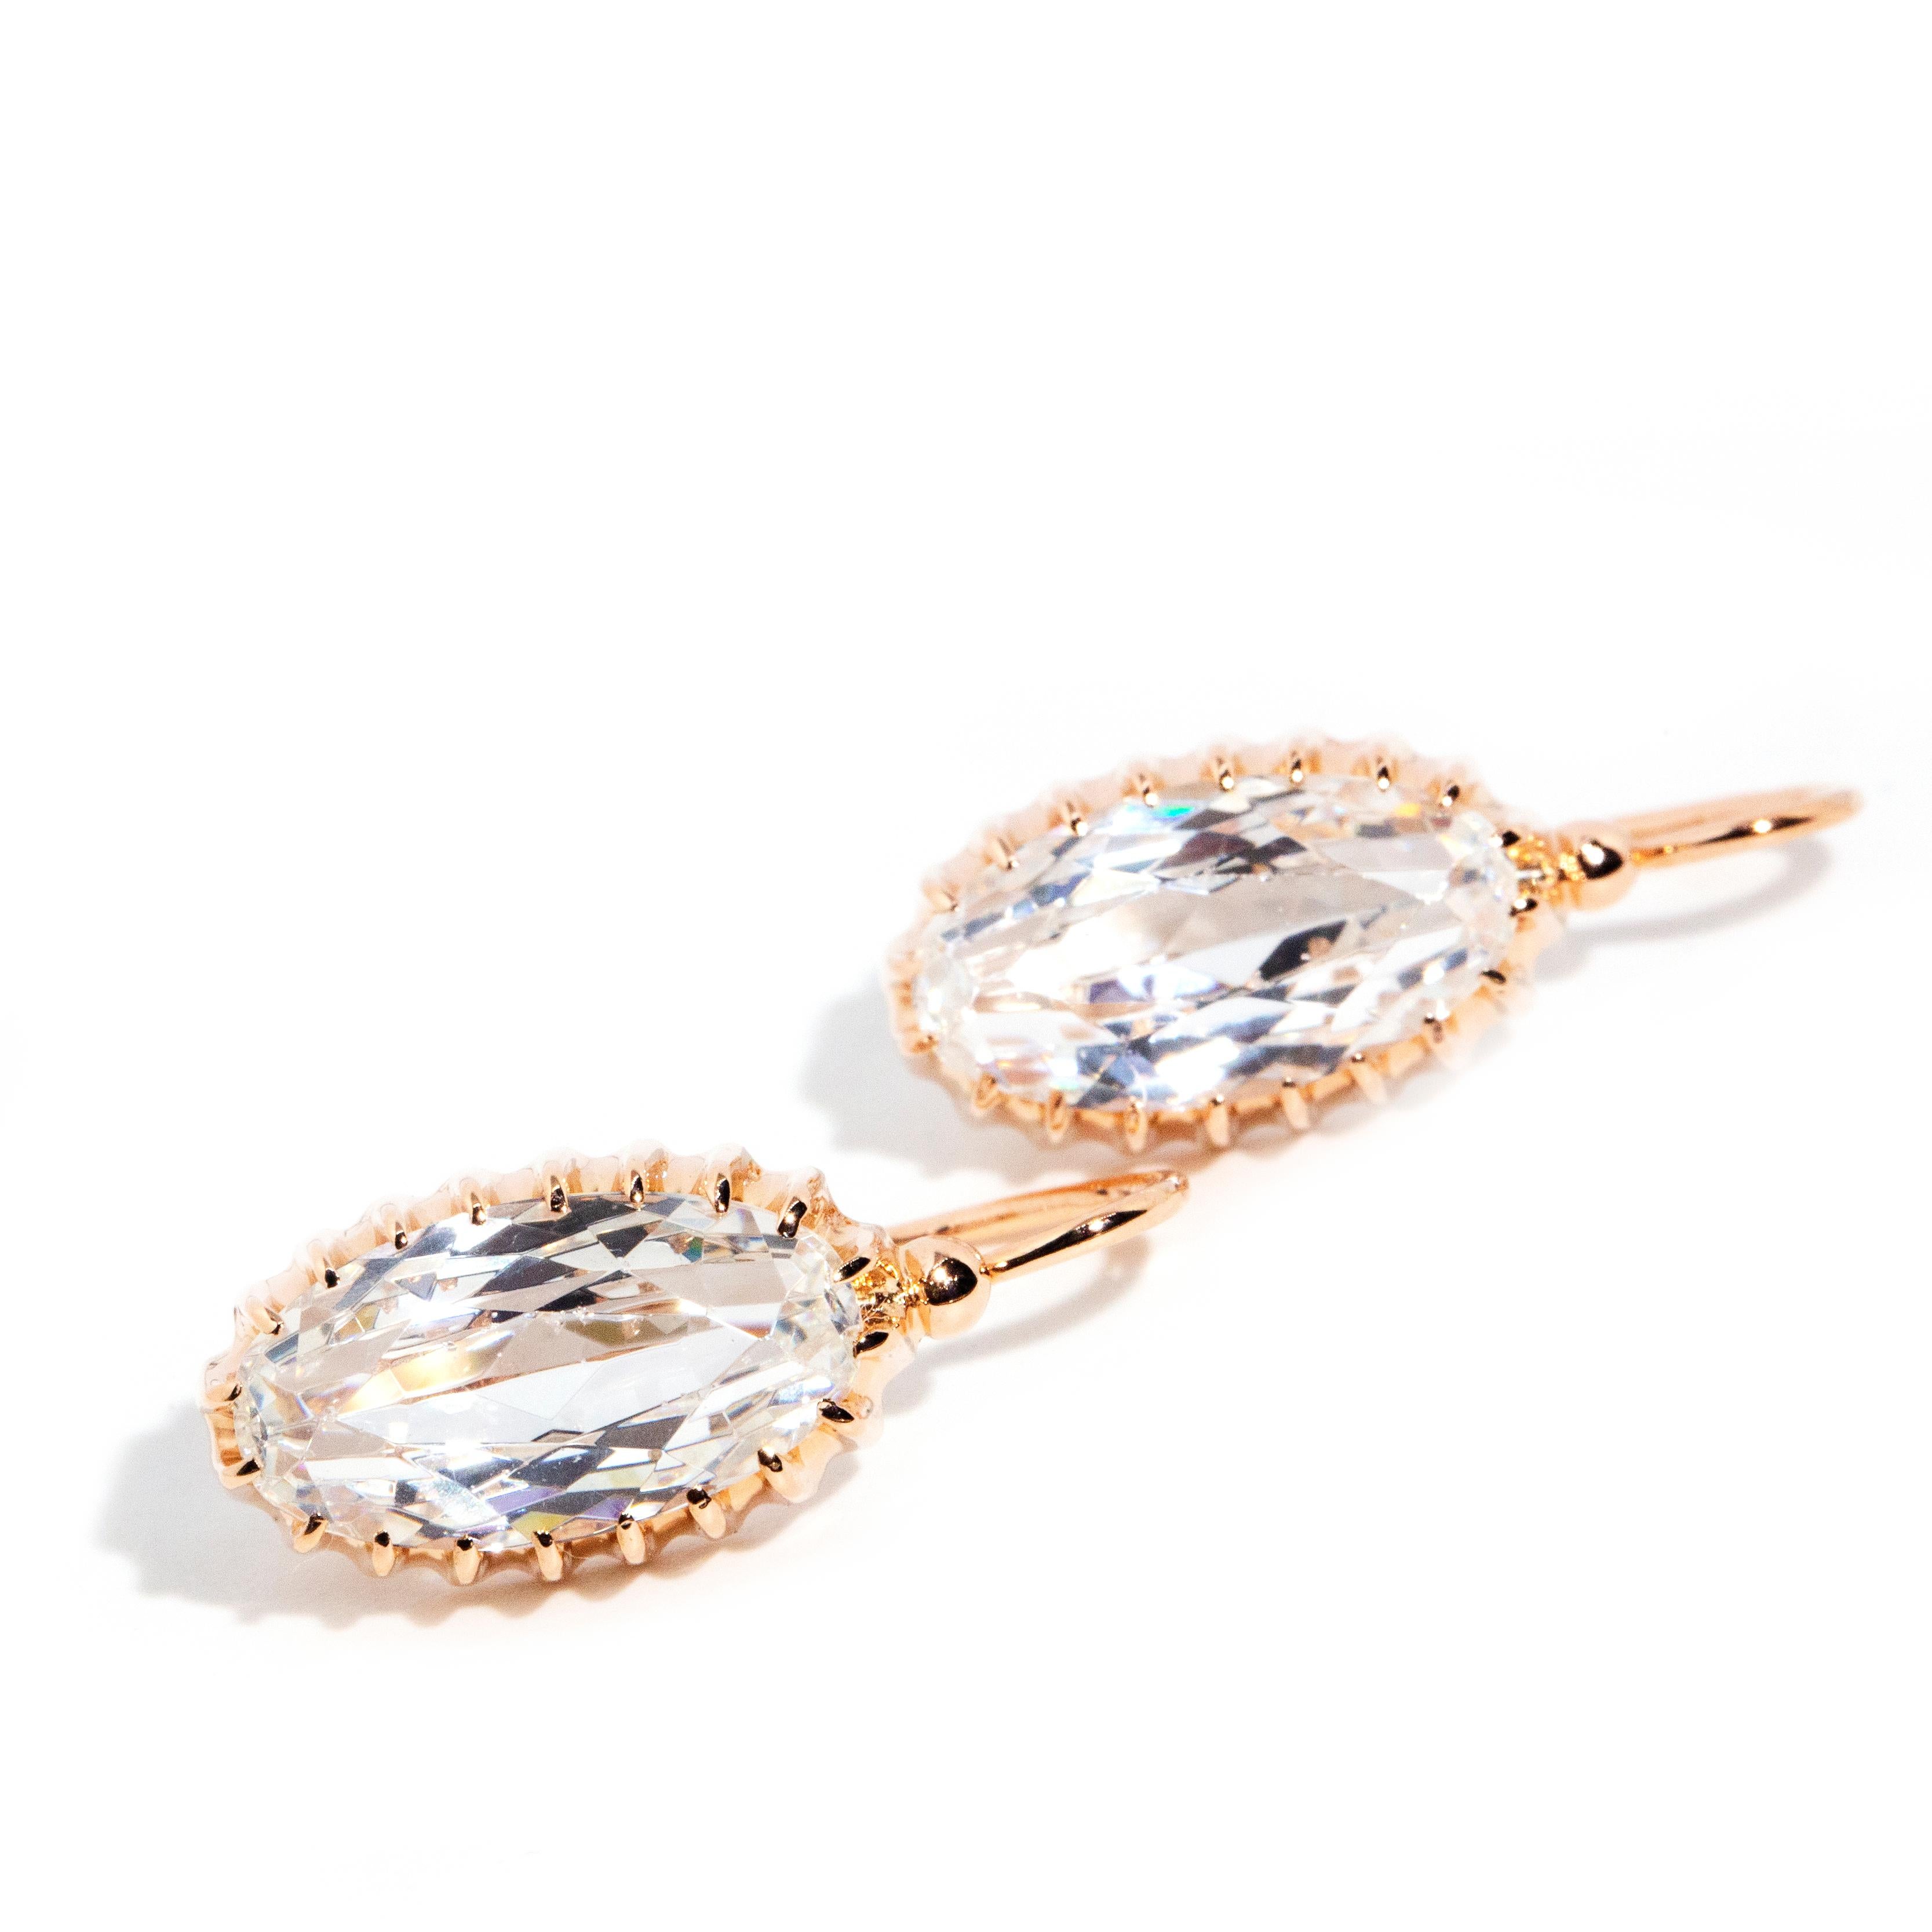 Oval Cut Vintage 1977 Russian Oval White Crystal Glass Drop Earrings 14 Carat Rose Gold